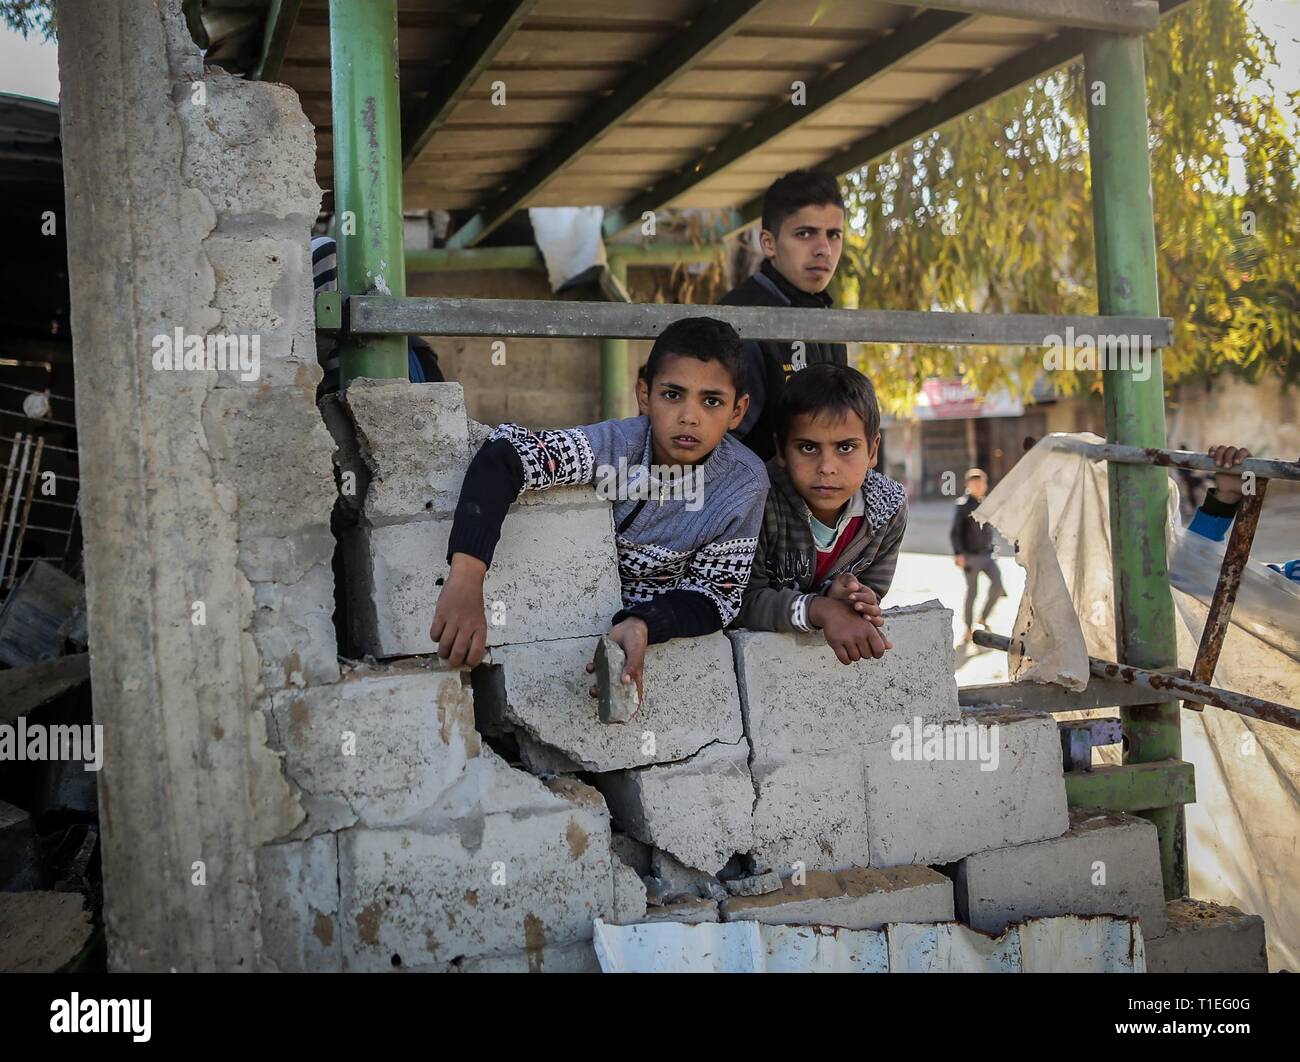 Gaza City, The Gaza Strip, Palestine. 26th Mar, 2019. Damages in houses around offices of Hamas politburo chief Ismail Haniyeh in Gaza city after Israeli airstrikes, Gaza hit by Israel after Hamas denies rocket attack on Tel Aviv. Credit: Abed Alrahman Alkahlout/Quds Net News/ZUMA Wire/Alamy Live News Stock Photo